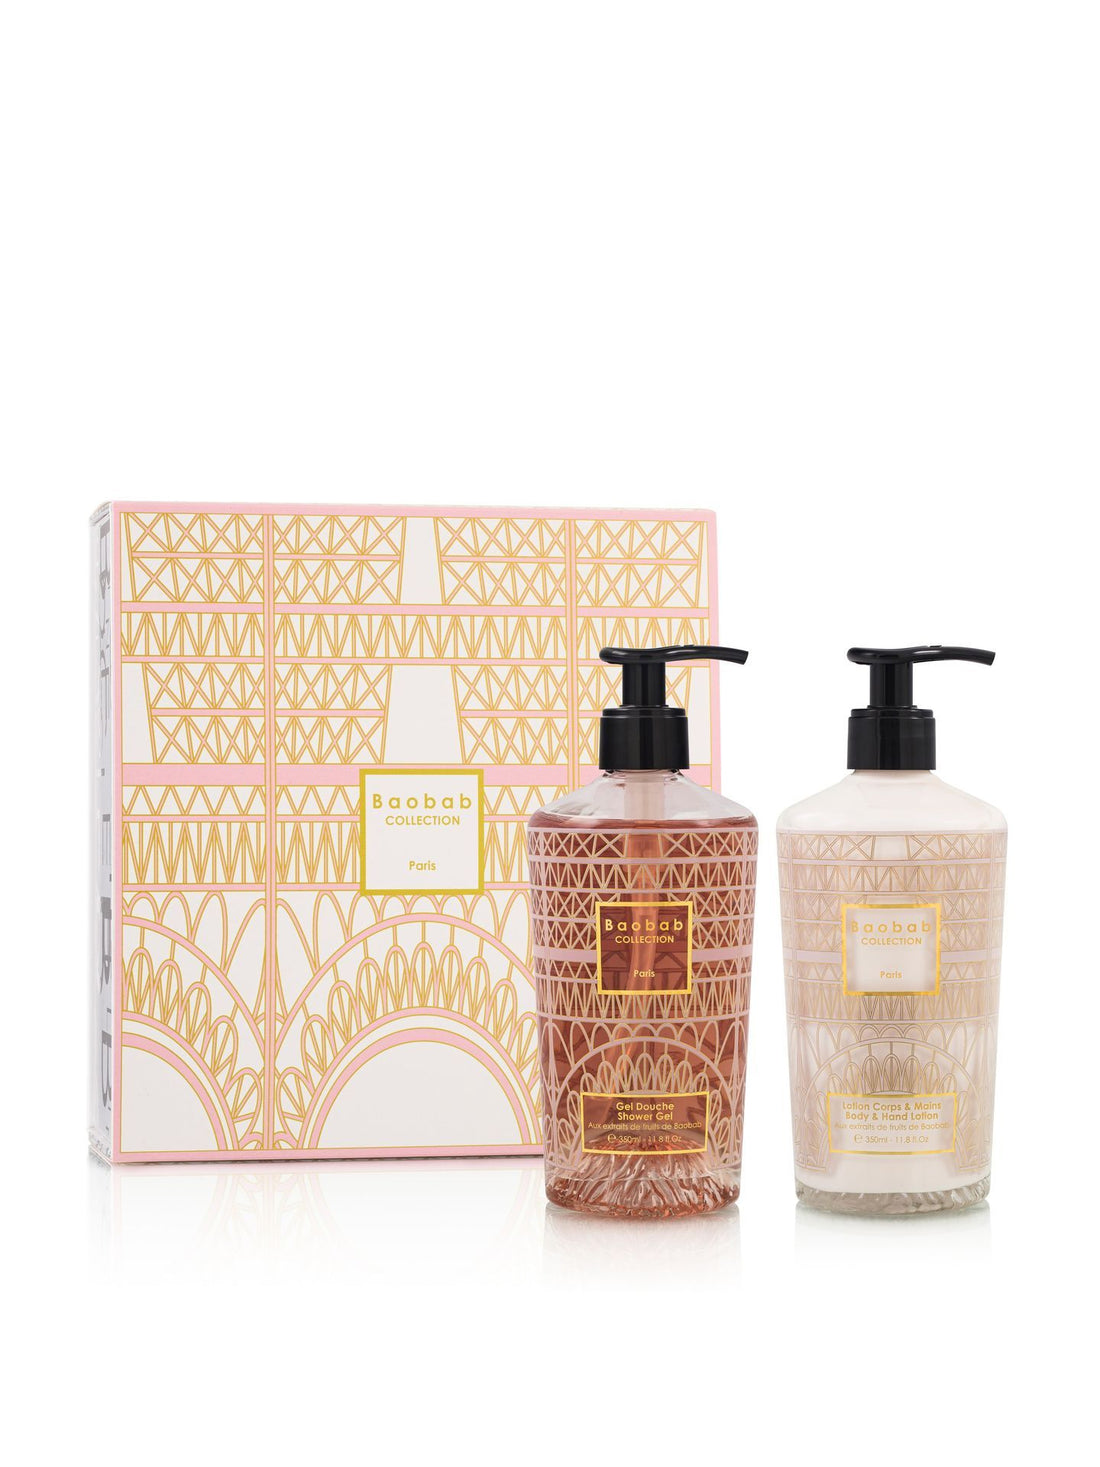 GIFT BOX PARIS BODY & HAND LOTION AND SHOWER GEL